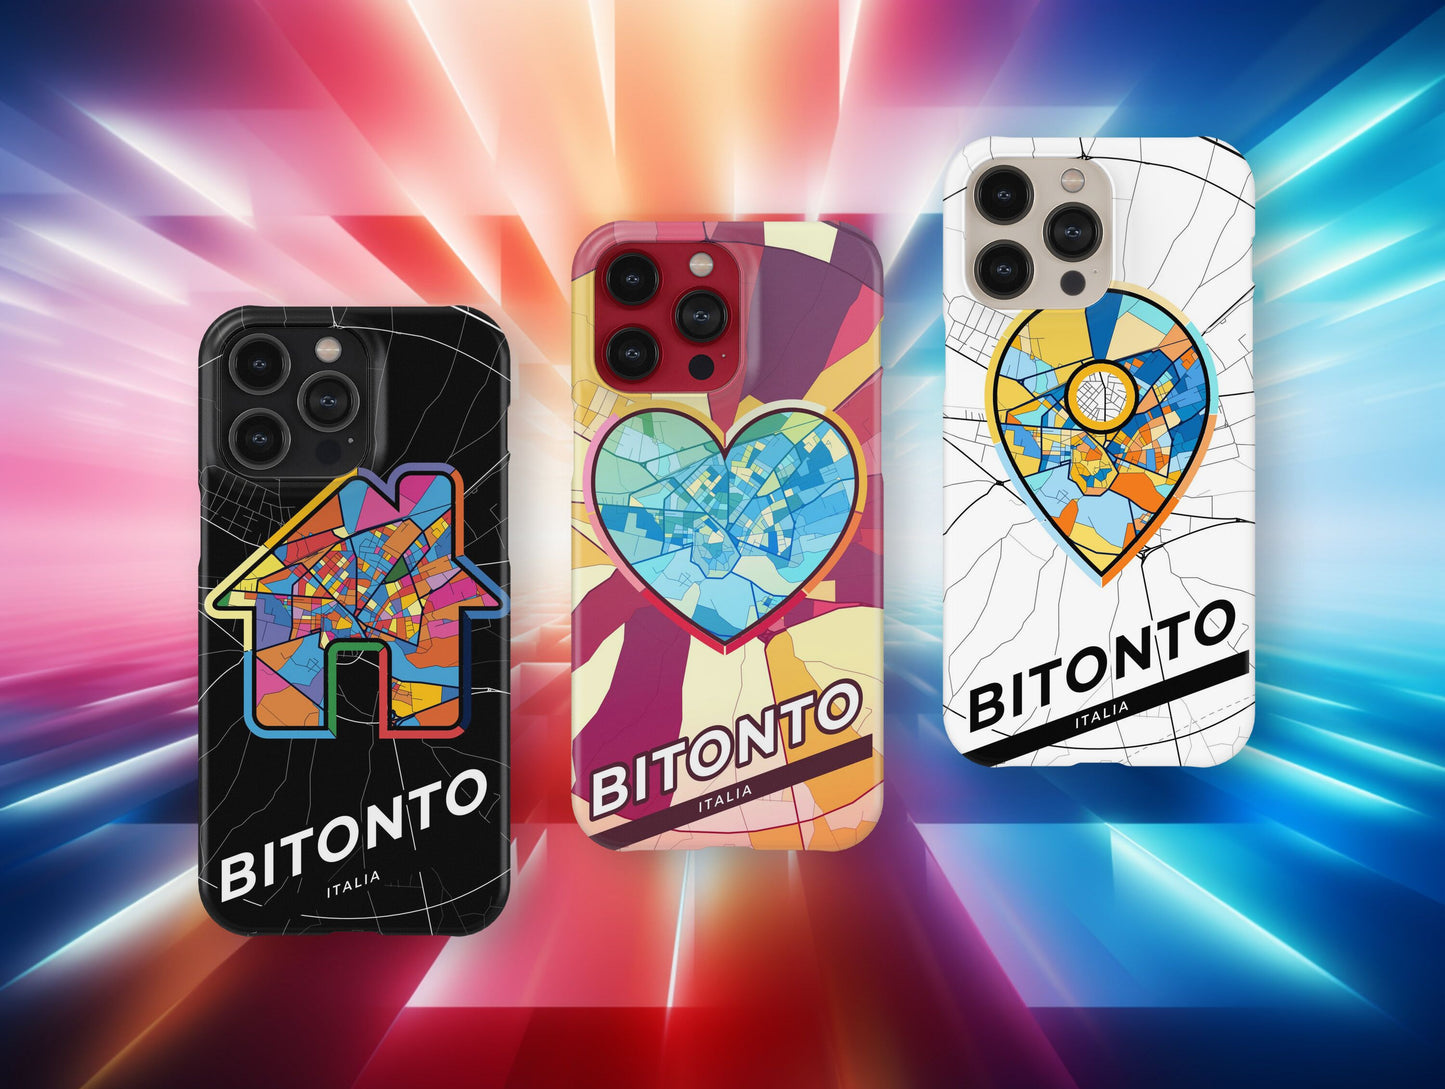 Bitonto Italy slim phone case with colorful icon. Birthday, wedding or housewarming gift. Couple match cases.